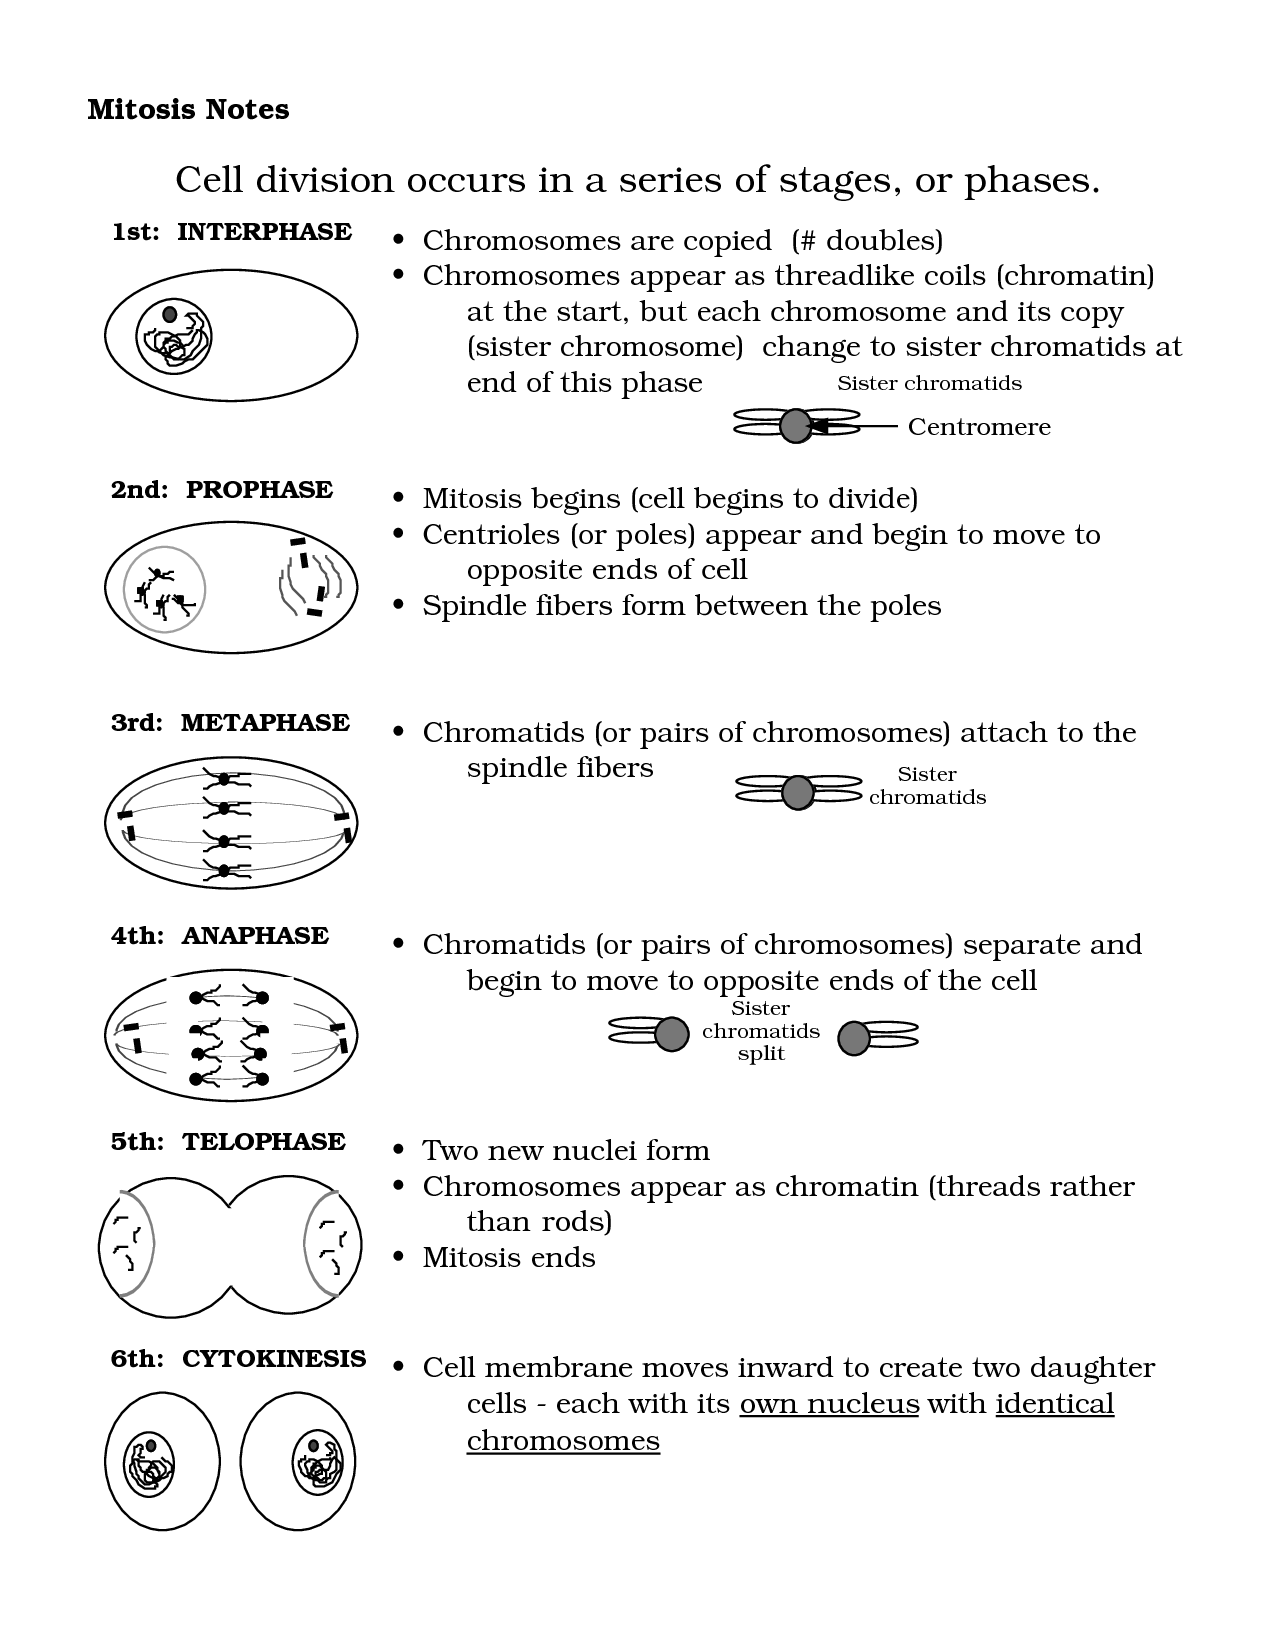 12 Best Images of Cell Division Worksheet  Mitosis Notes Worksheet Answers, Mitosis Worksheet 